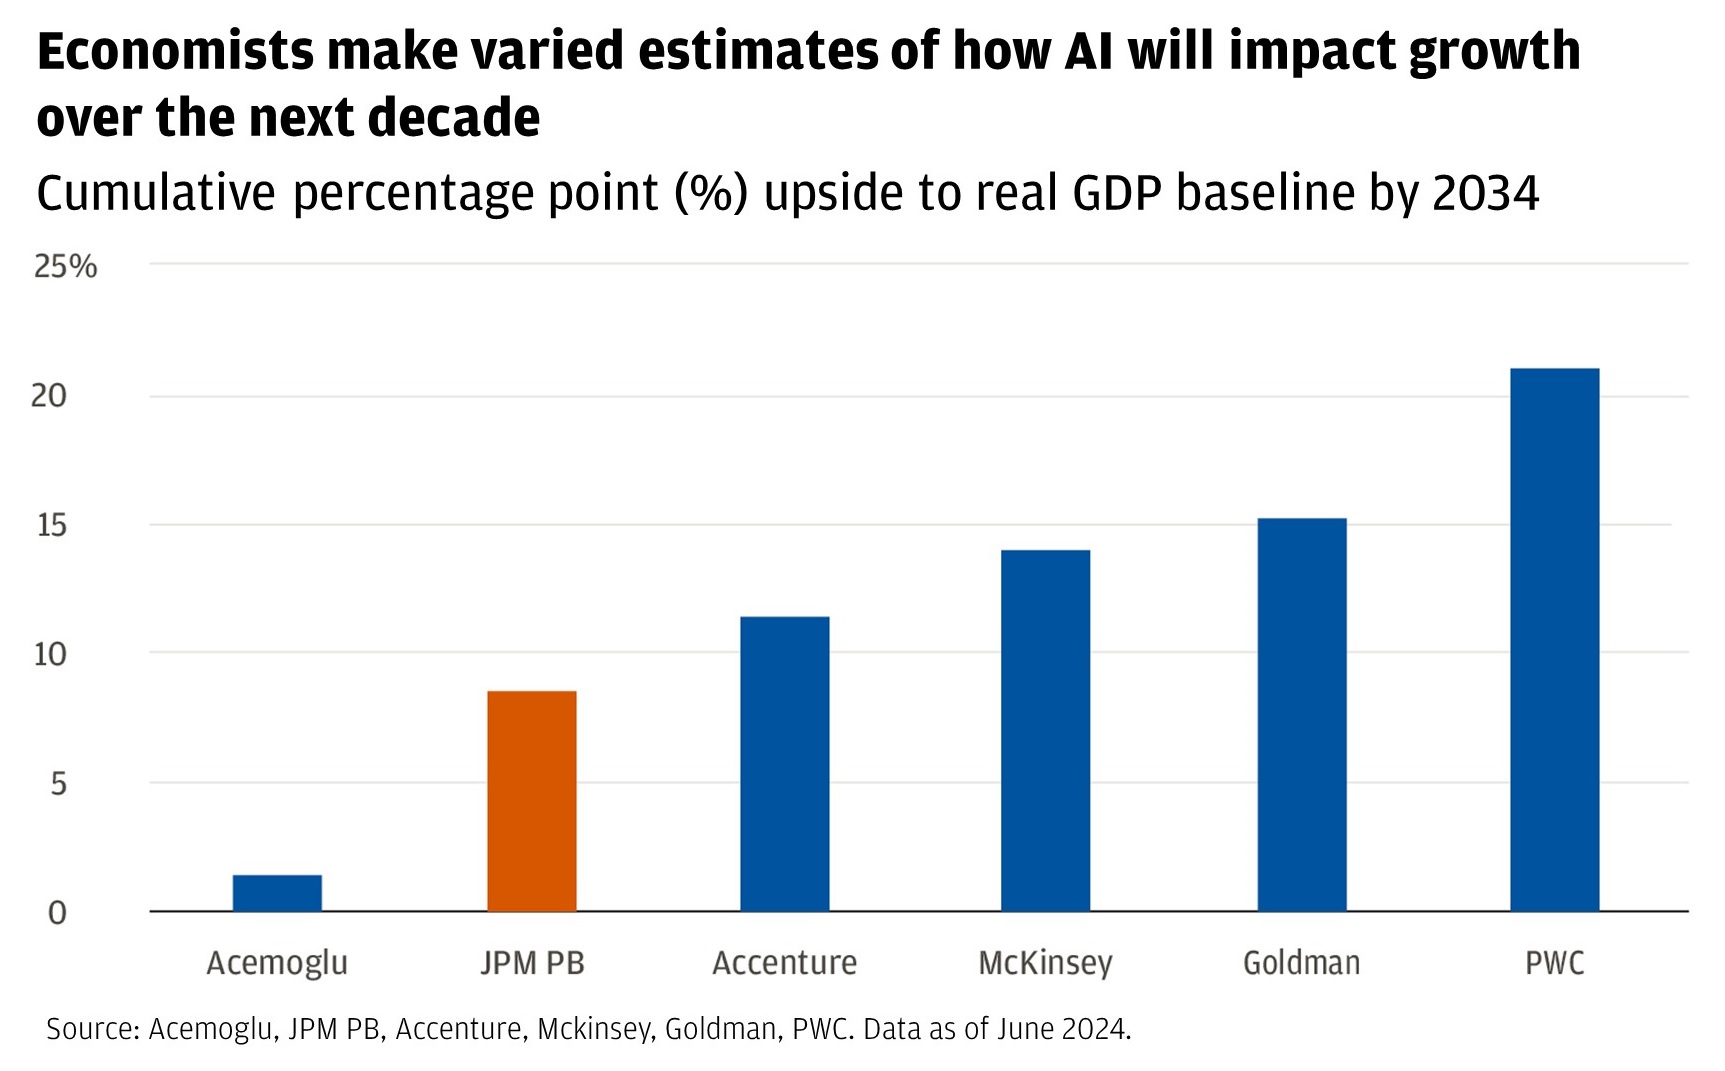 Chart describes AI’s potential impact on growth over the next decade and cumulative percentage upside to real GDP baseline by 2034.